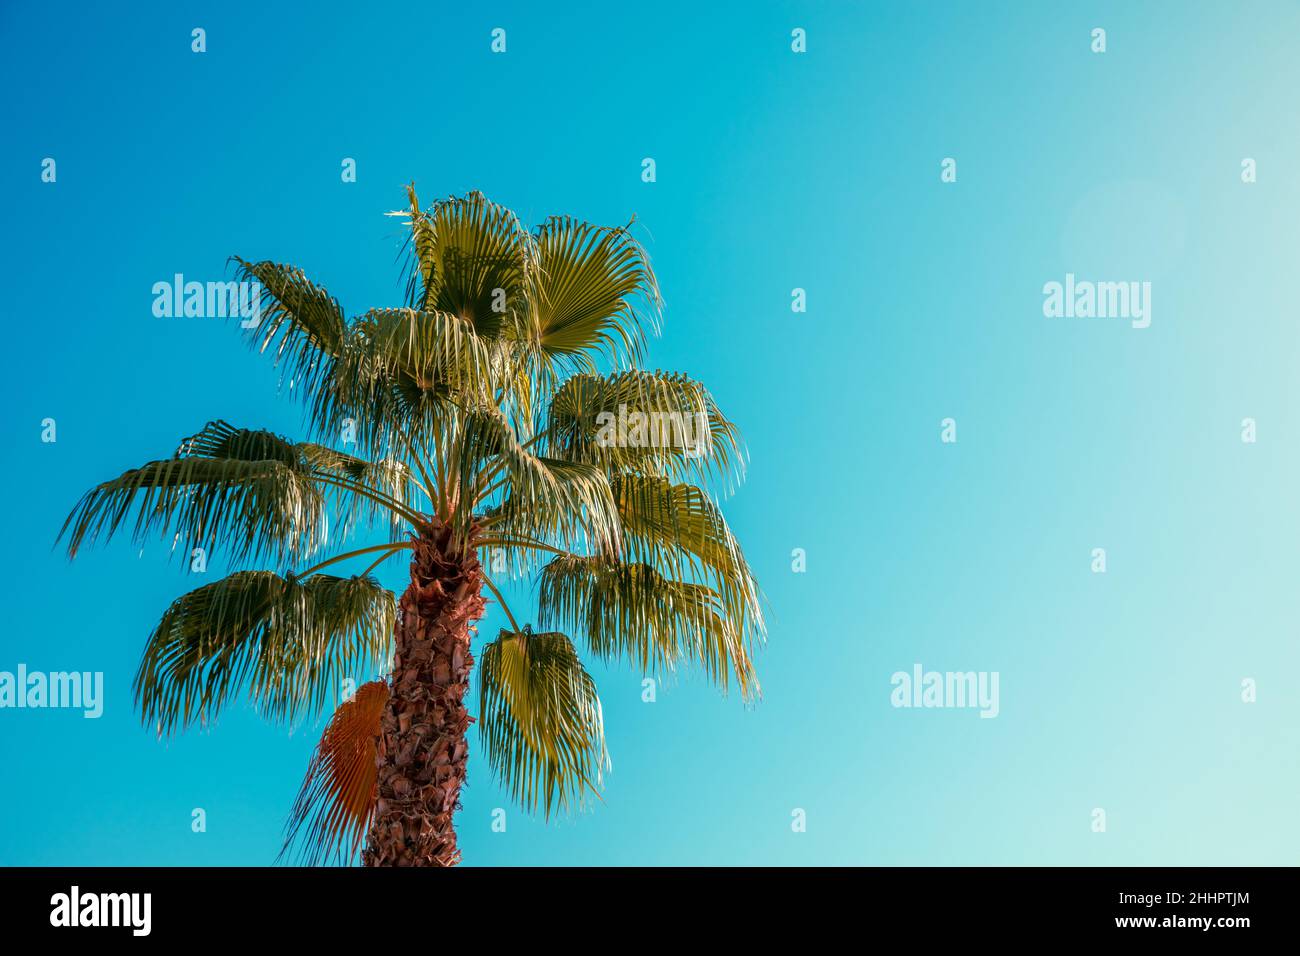 Top of date palm against blue sky Stock Photo